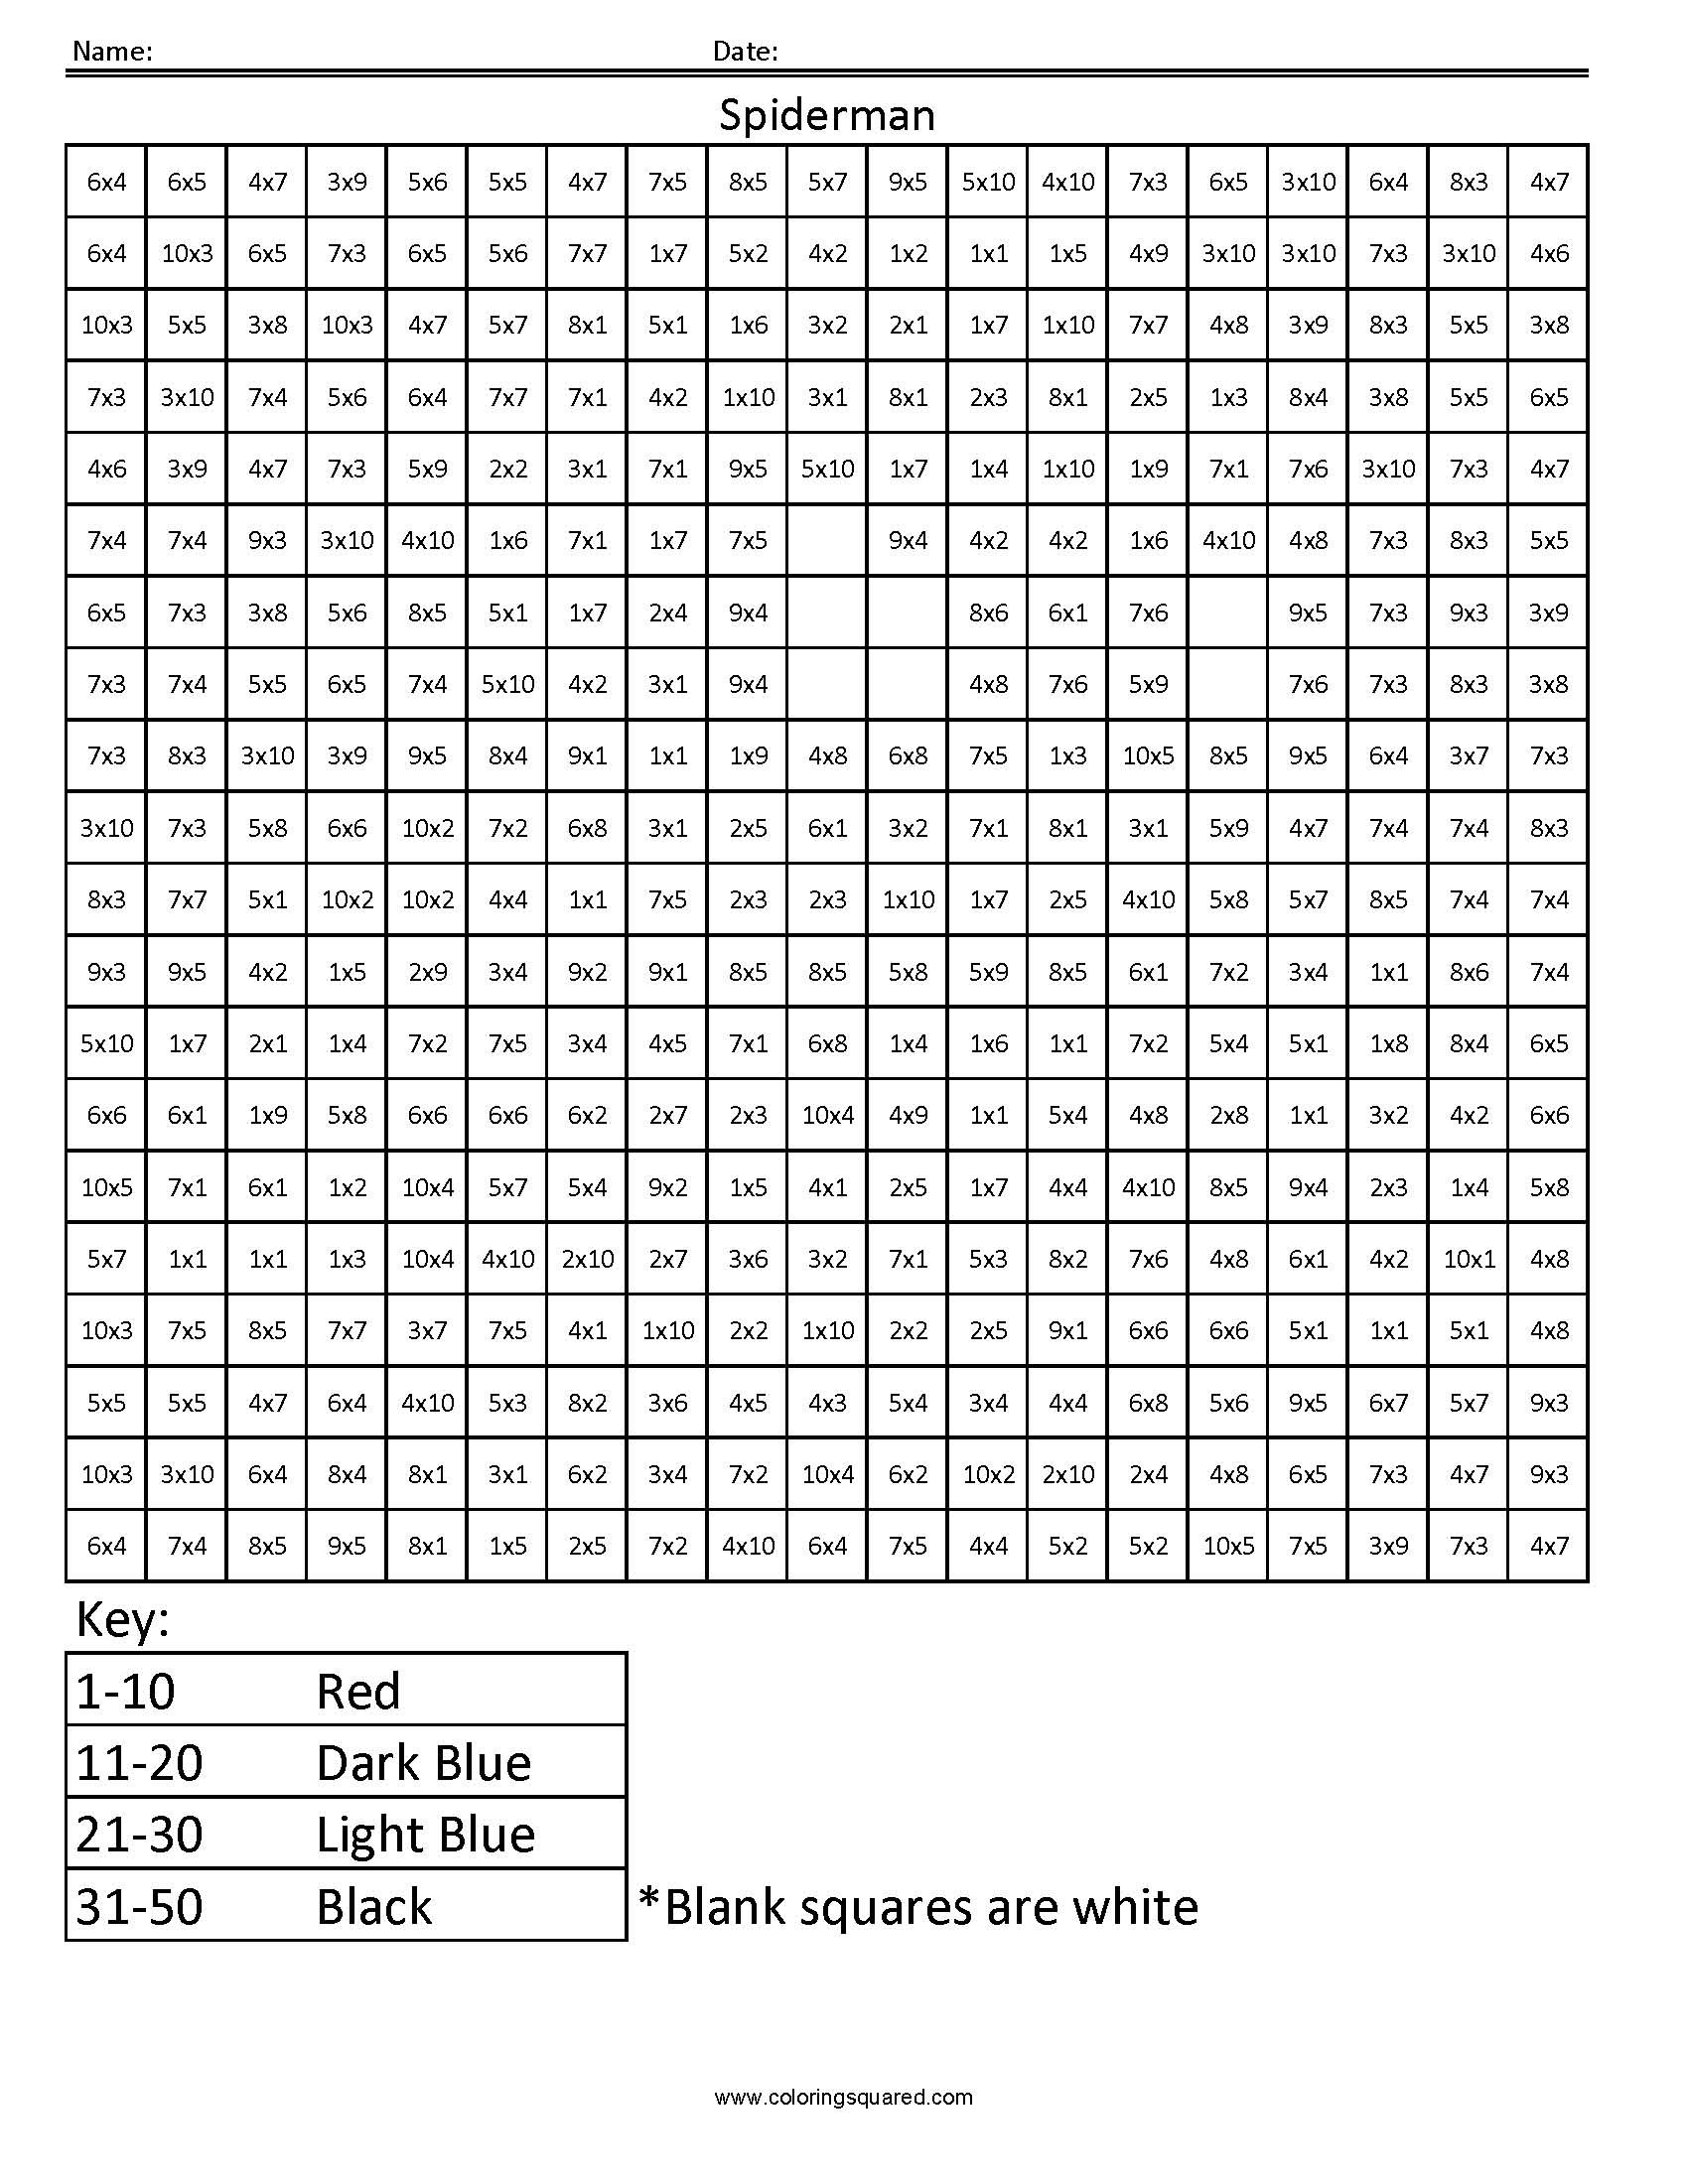 Coloring Squared Worksheets Spiderman Basic Multiplication Coloring Squared